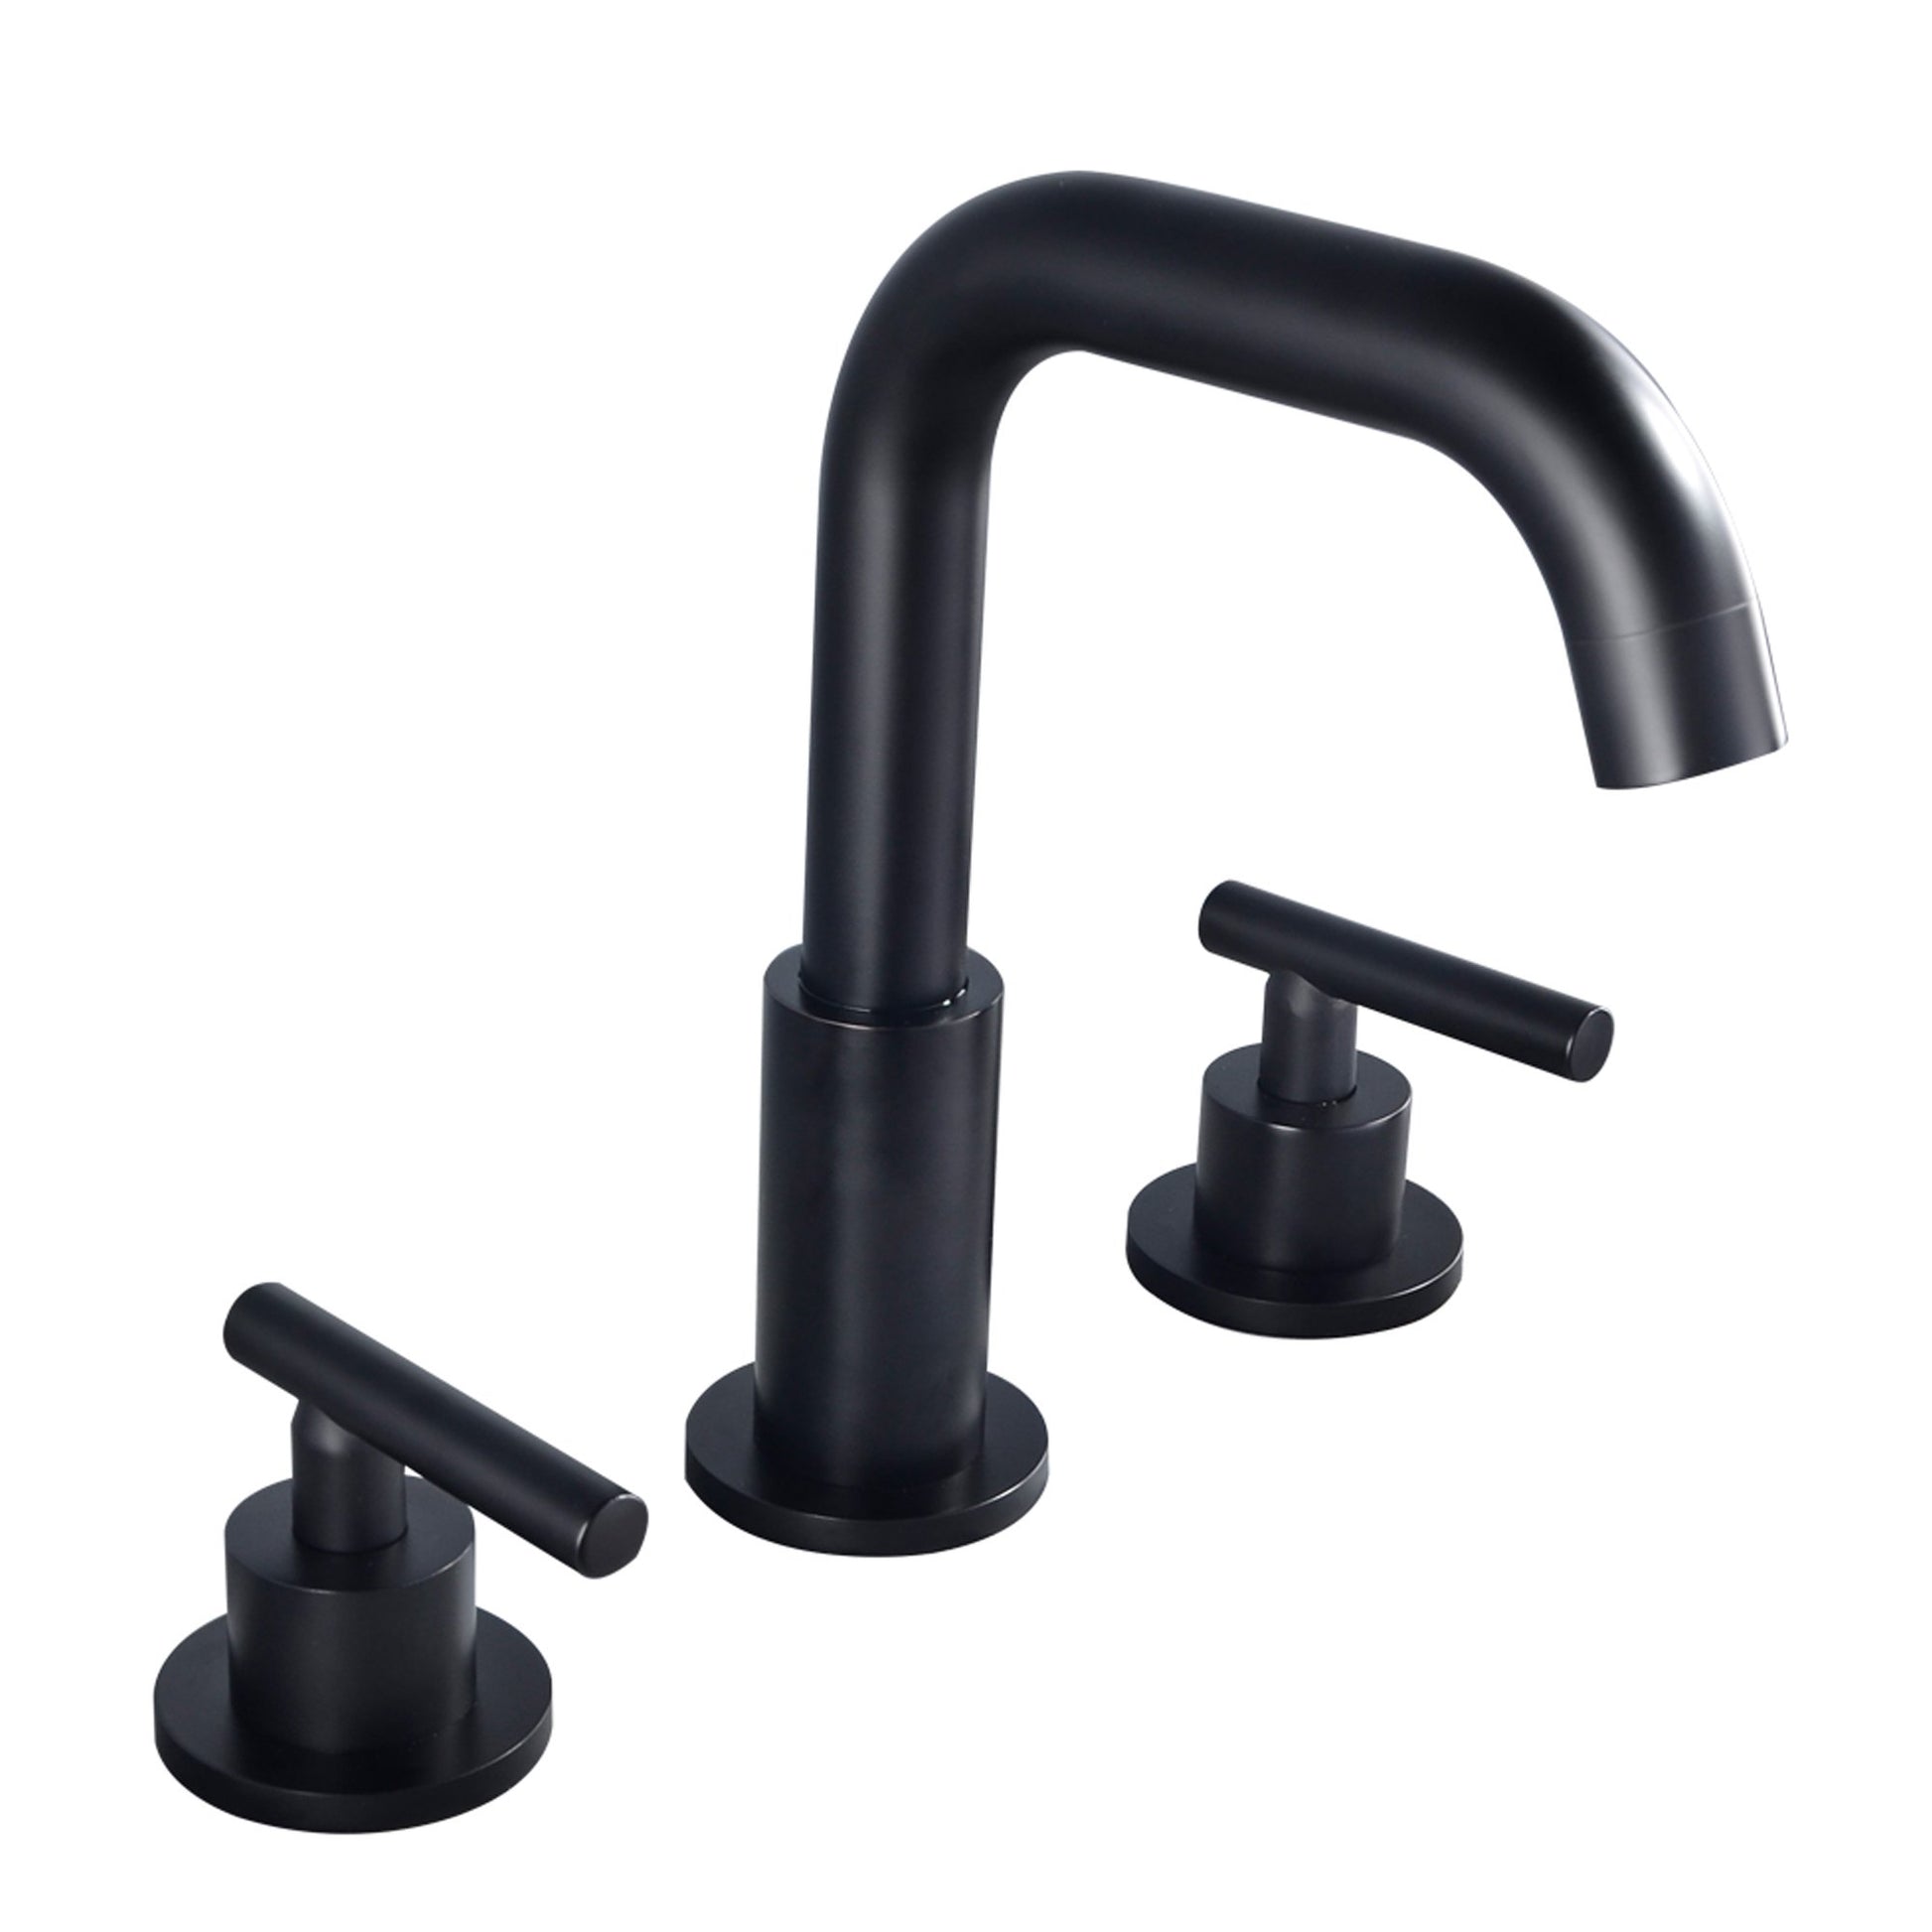 8 in. Widespread 2-Handle Mid-Arc Bathroom Faucet with Valve and cUPC Water Supply Lines in Matte Black - Alipuinc